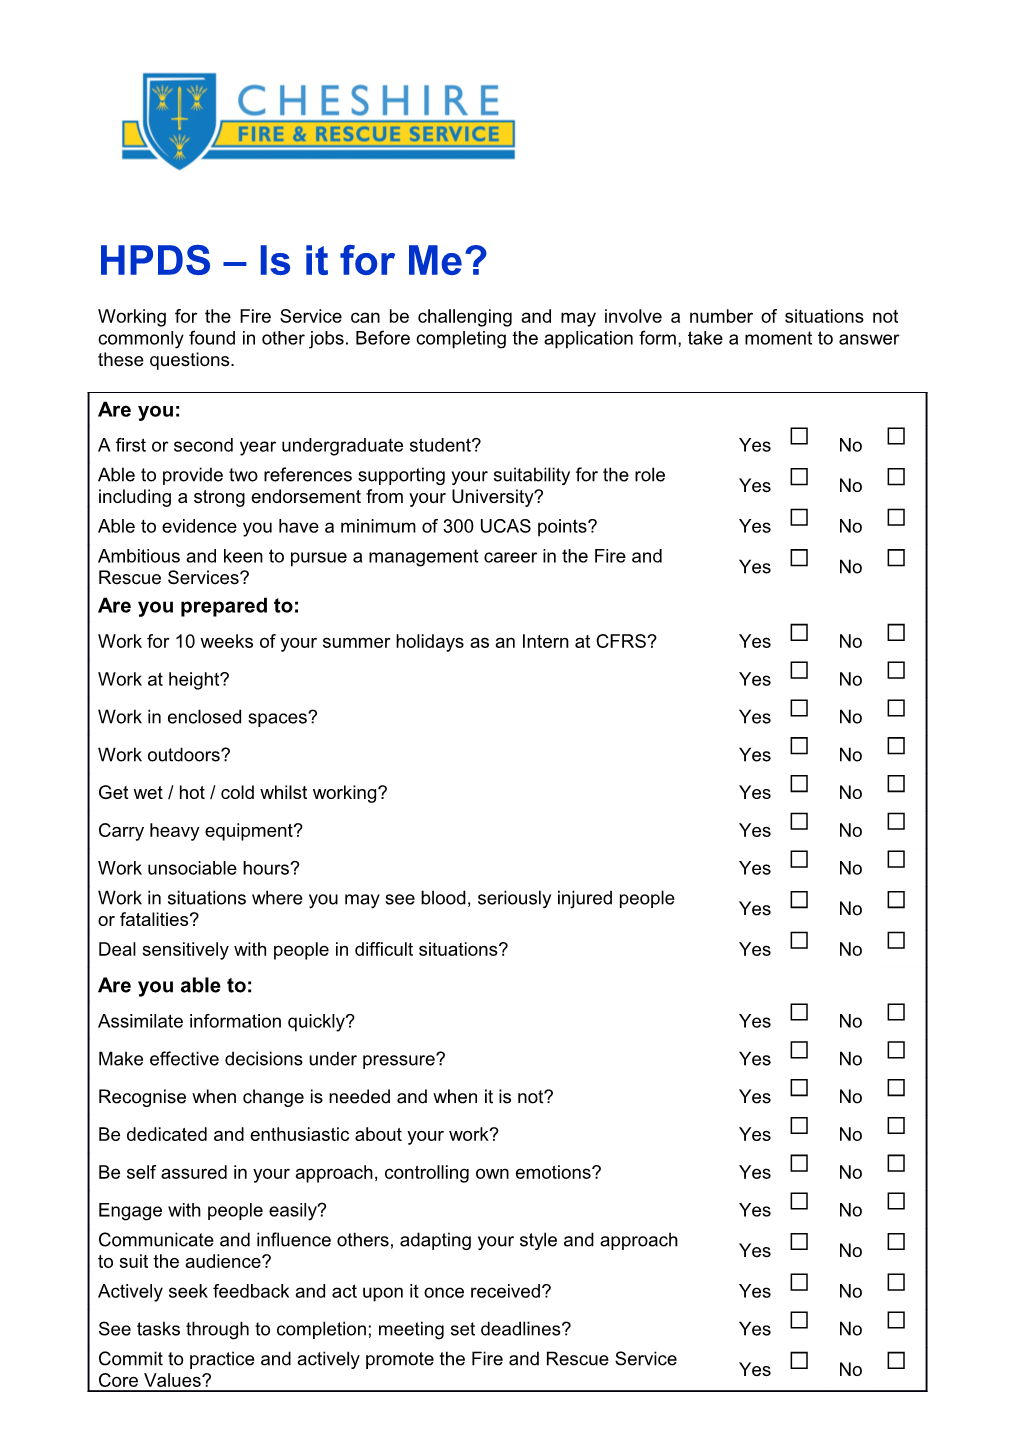 HPDS Is It for Me?